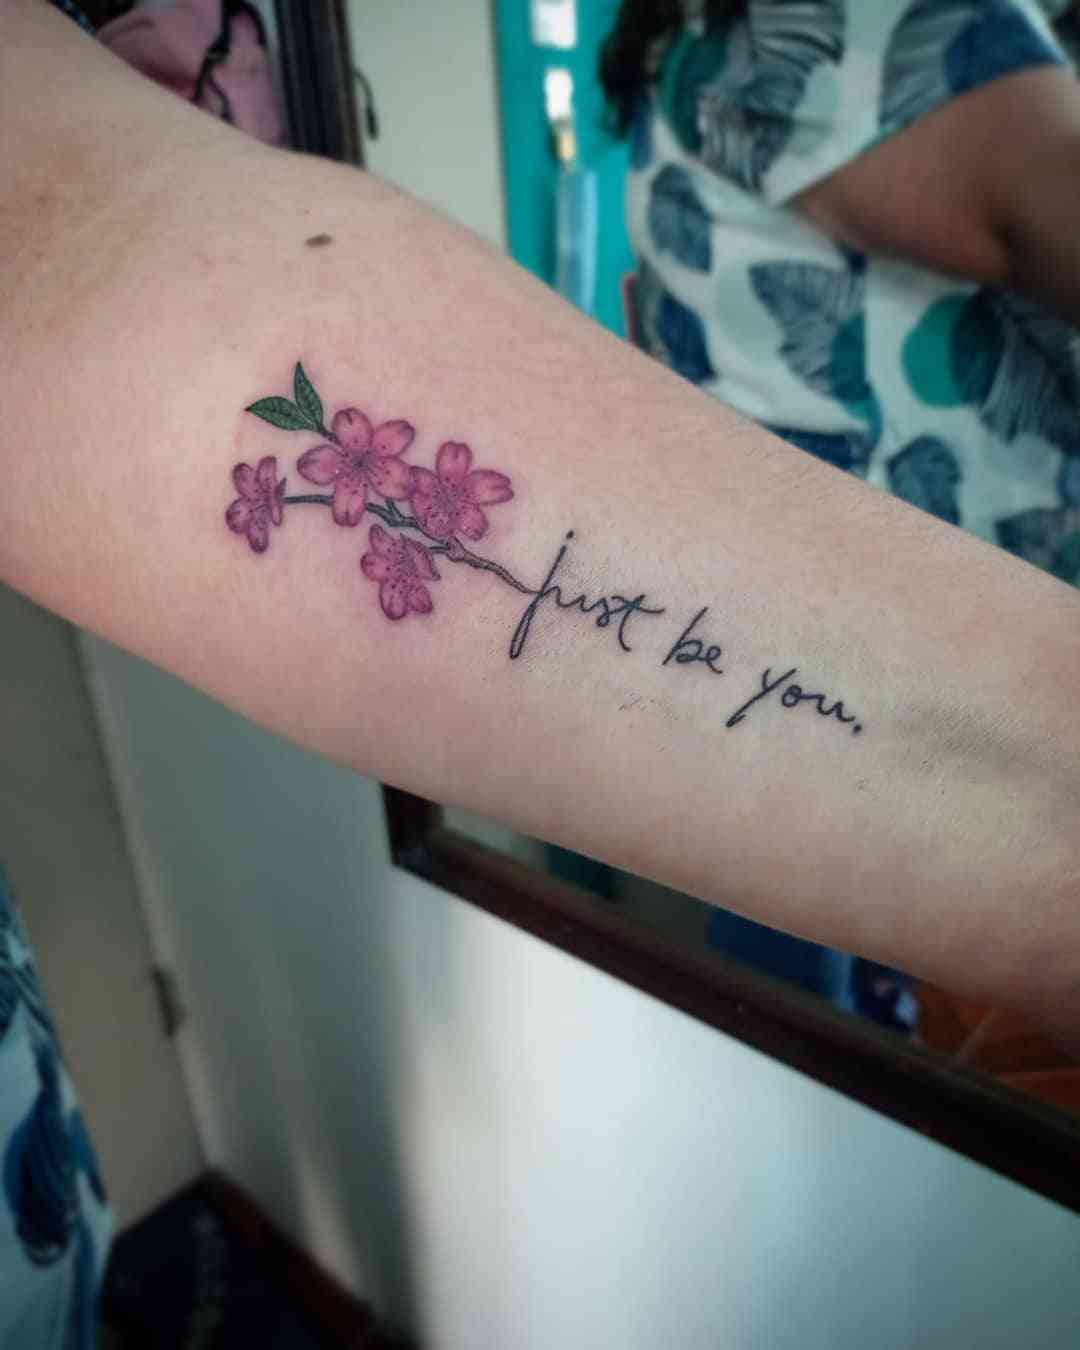 40+ Inspiring Arm Quote Tattoos Ideas: What’s Your Favorite? images 20